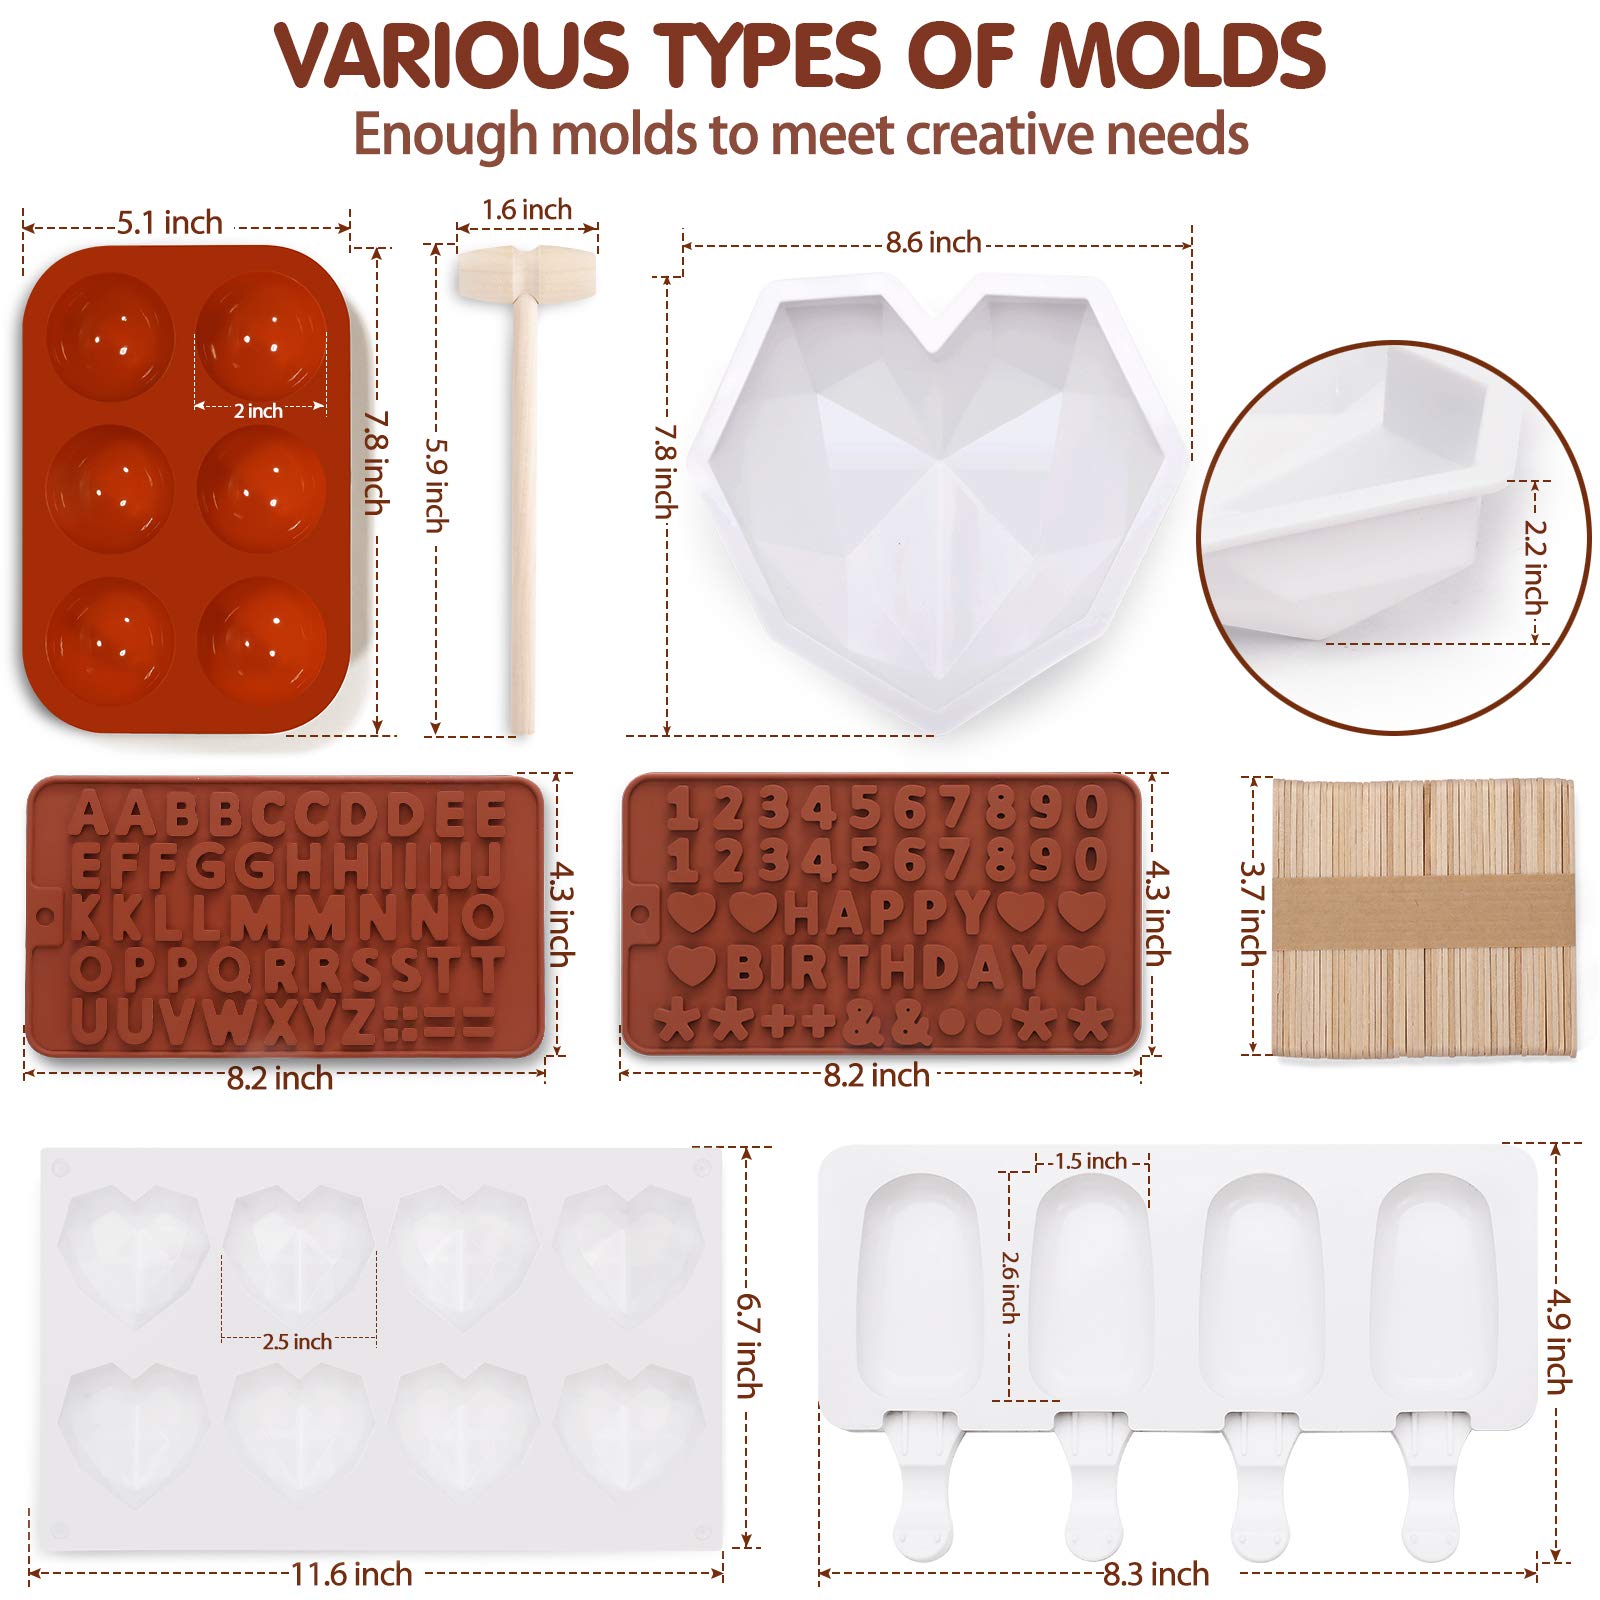 123 Pcs Heart Silicone Molds Set for Chocolate Includes 1x Breakable Heart Mold,2x Cocoa Bomb Molds,1x 8 Cavities Heart Mold,15x Wood Hammers,2x Number and Letter Molds,2x Popsicle Molds,100x Sticks